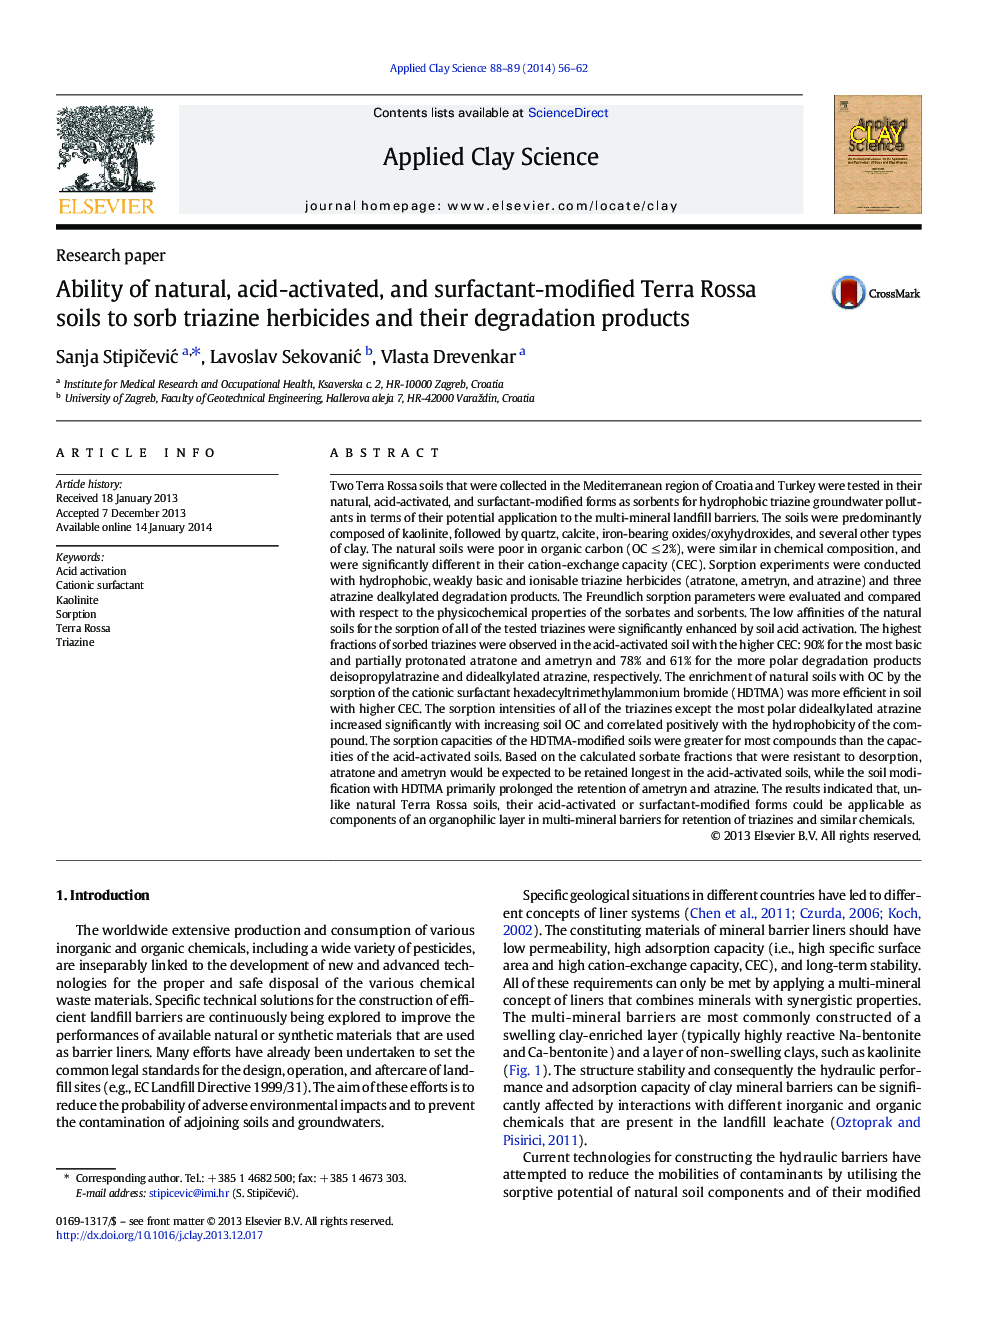 Ability of natural, acid-activated, and surfactant-modified Terra Rossa soils to sorb triazine herbicides and their degradation products